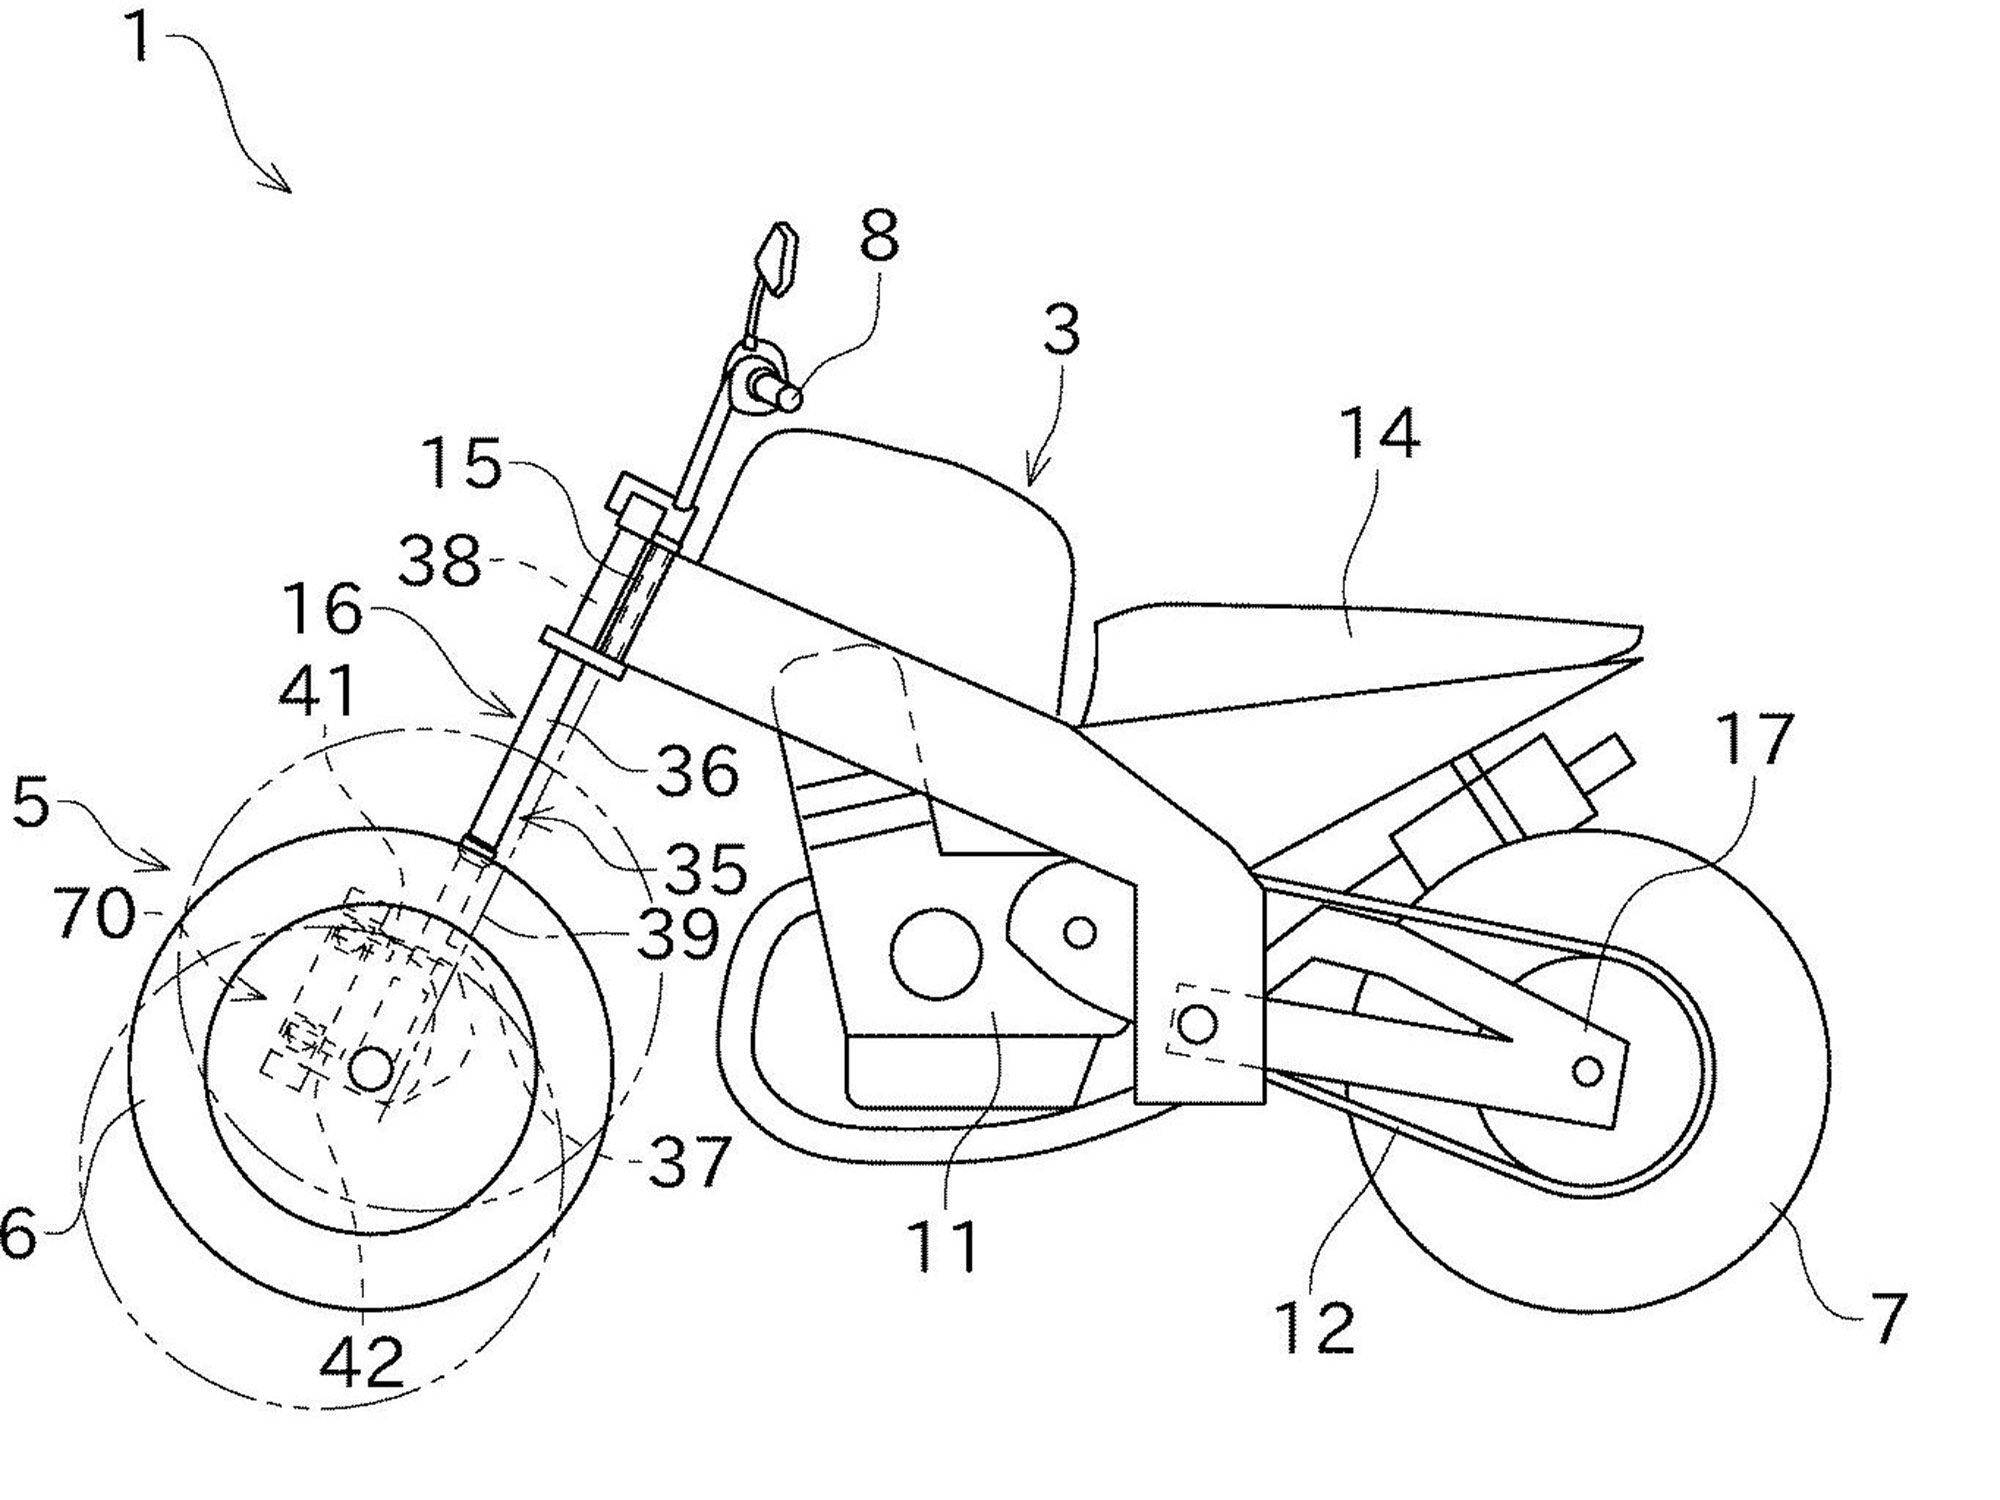 Kawasaki’s new tilting trike patents reveal a system that can be bolted in place of the front wheel on almost any conventional bike.